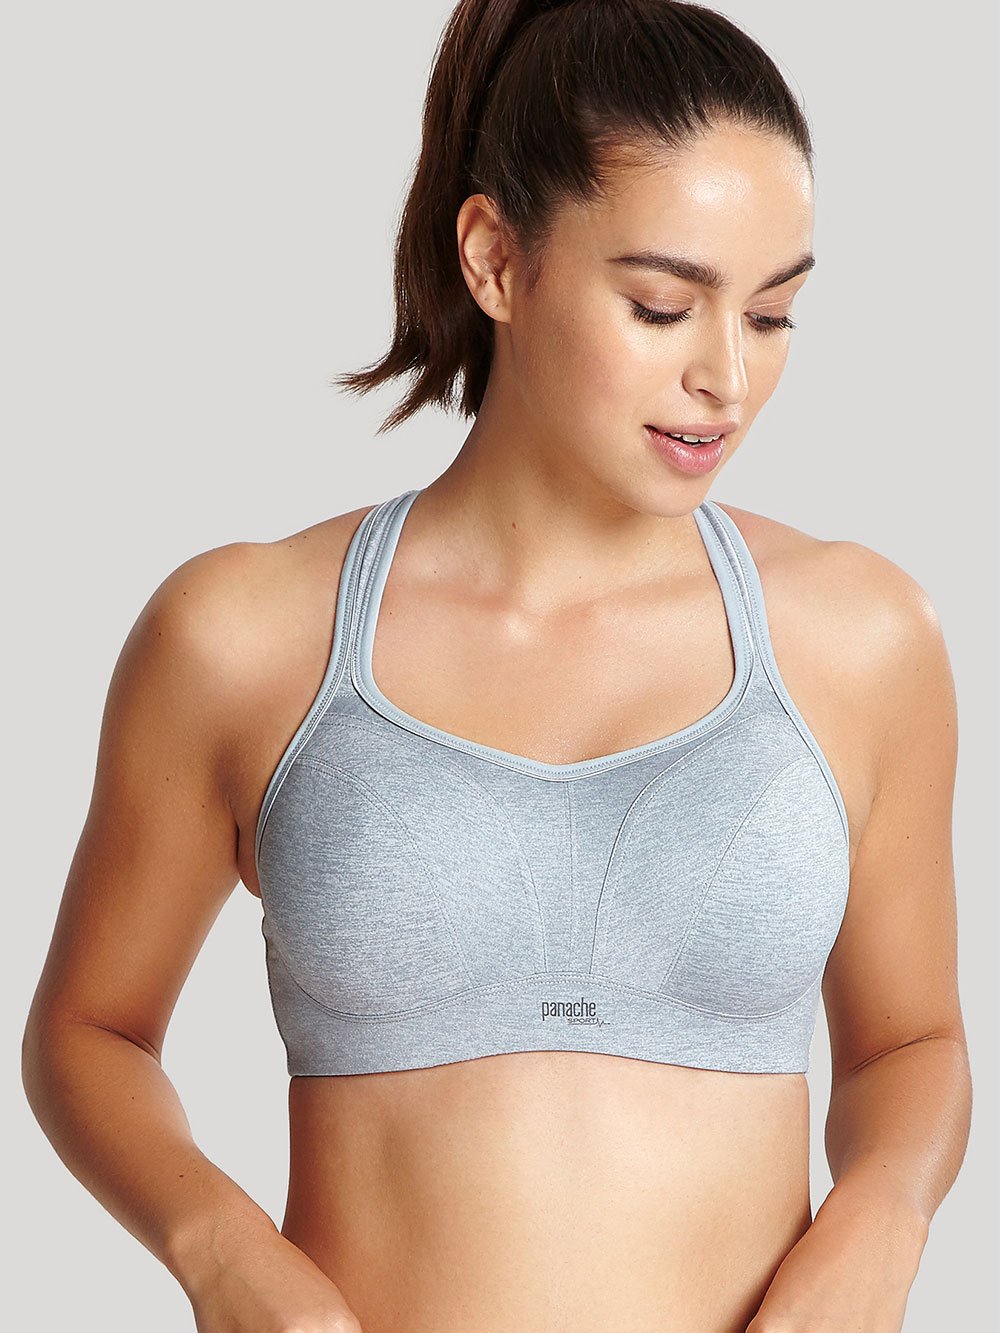 32E Bras: Bras for 32E Boobs and Breast Size Tagged Sexy Sports Bra -  HauteFlair